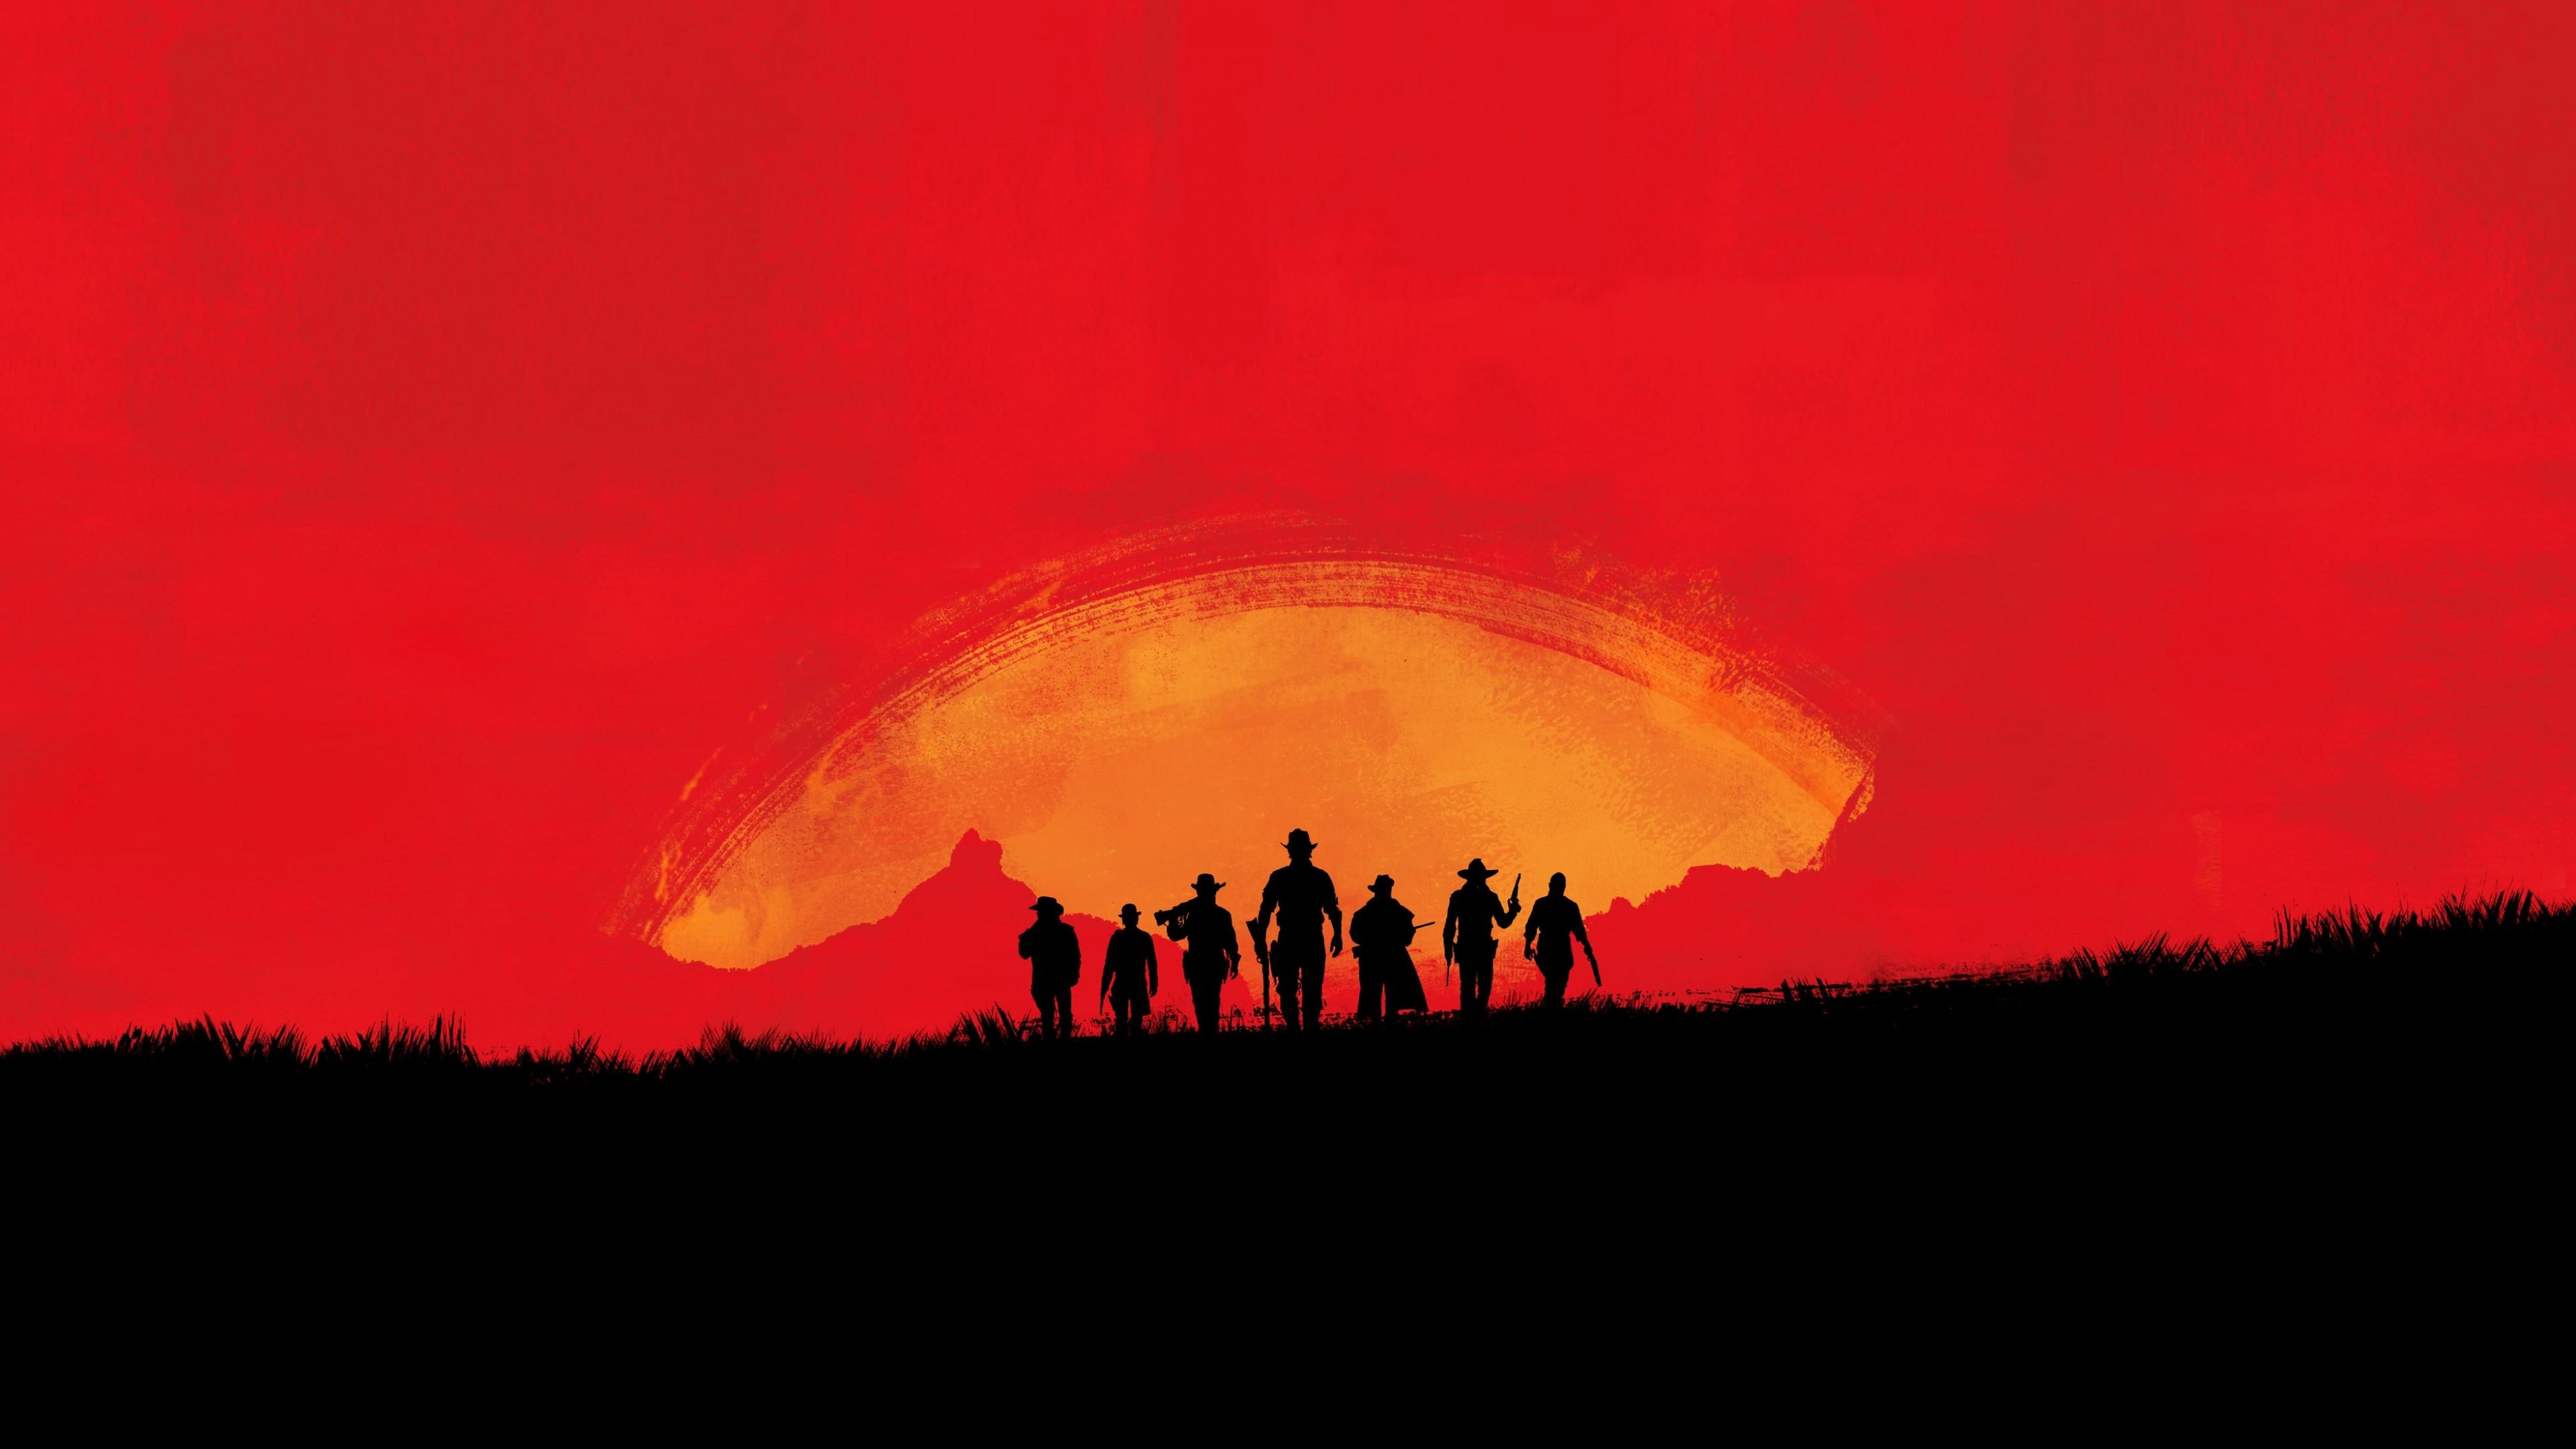 Wallpaper Red Dead Redemption rockstar, PS Xbox One, Games